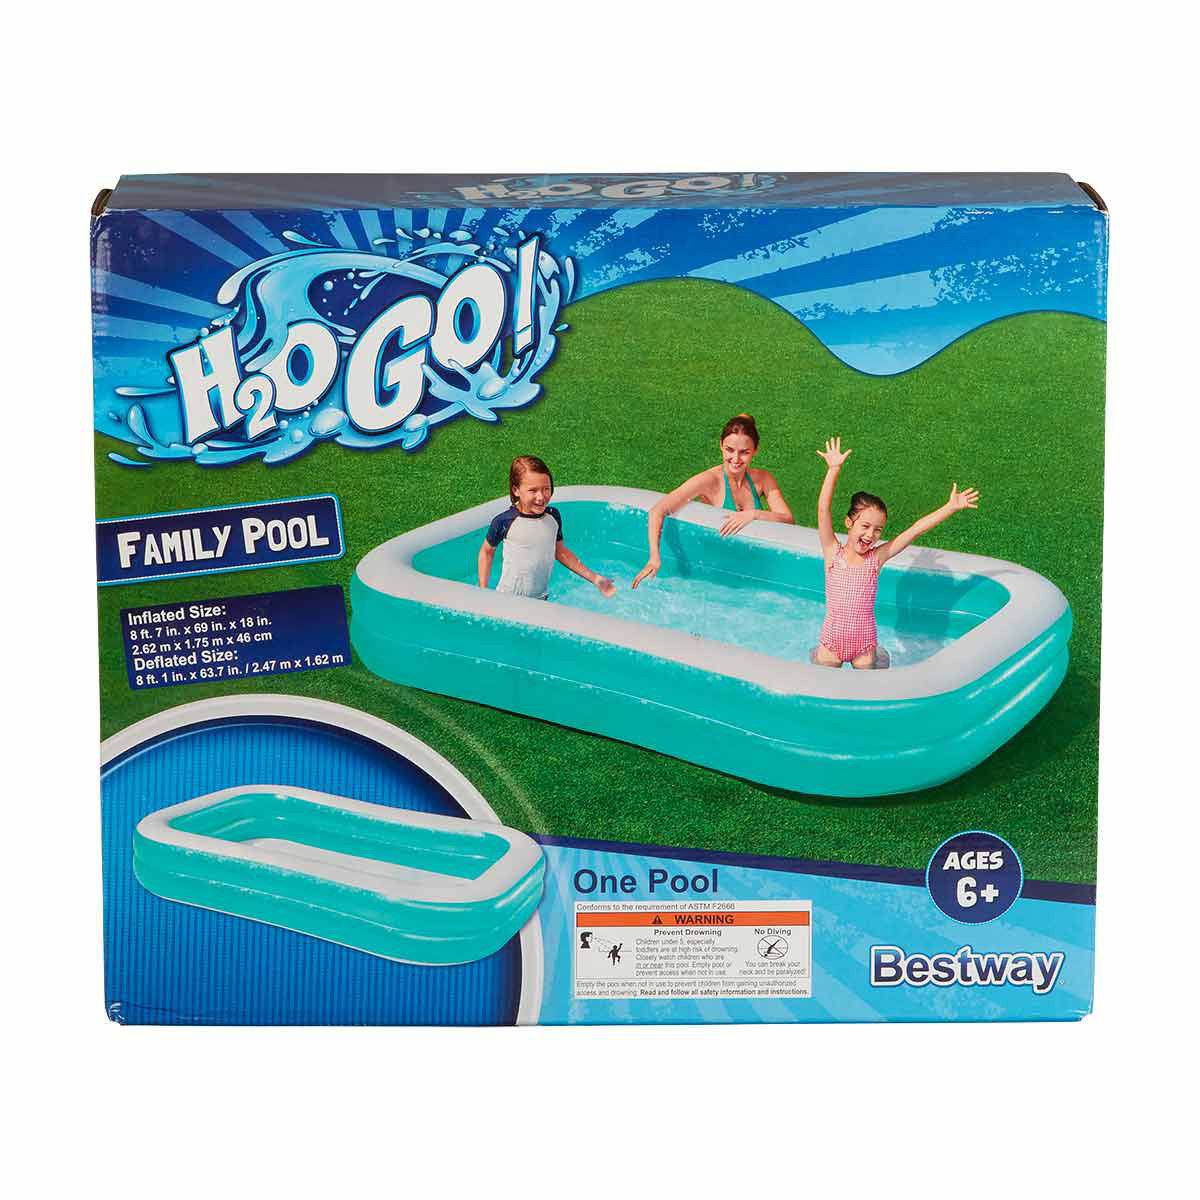 H2OGO! Inflatable Family Pool